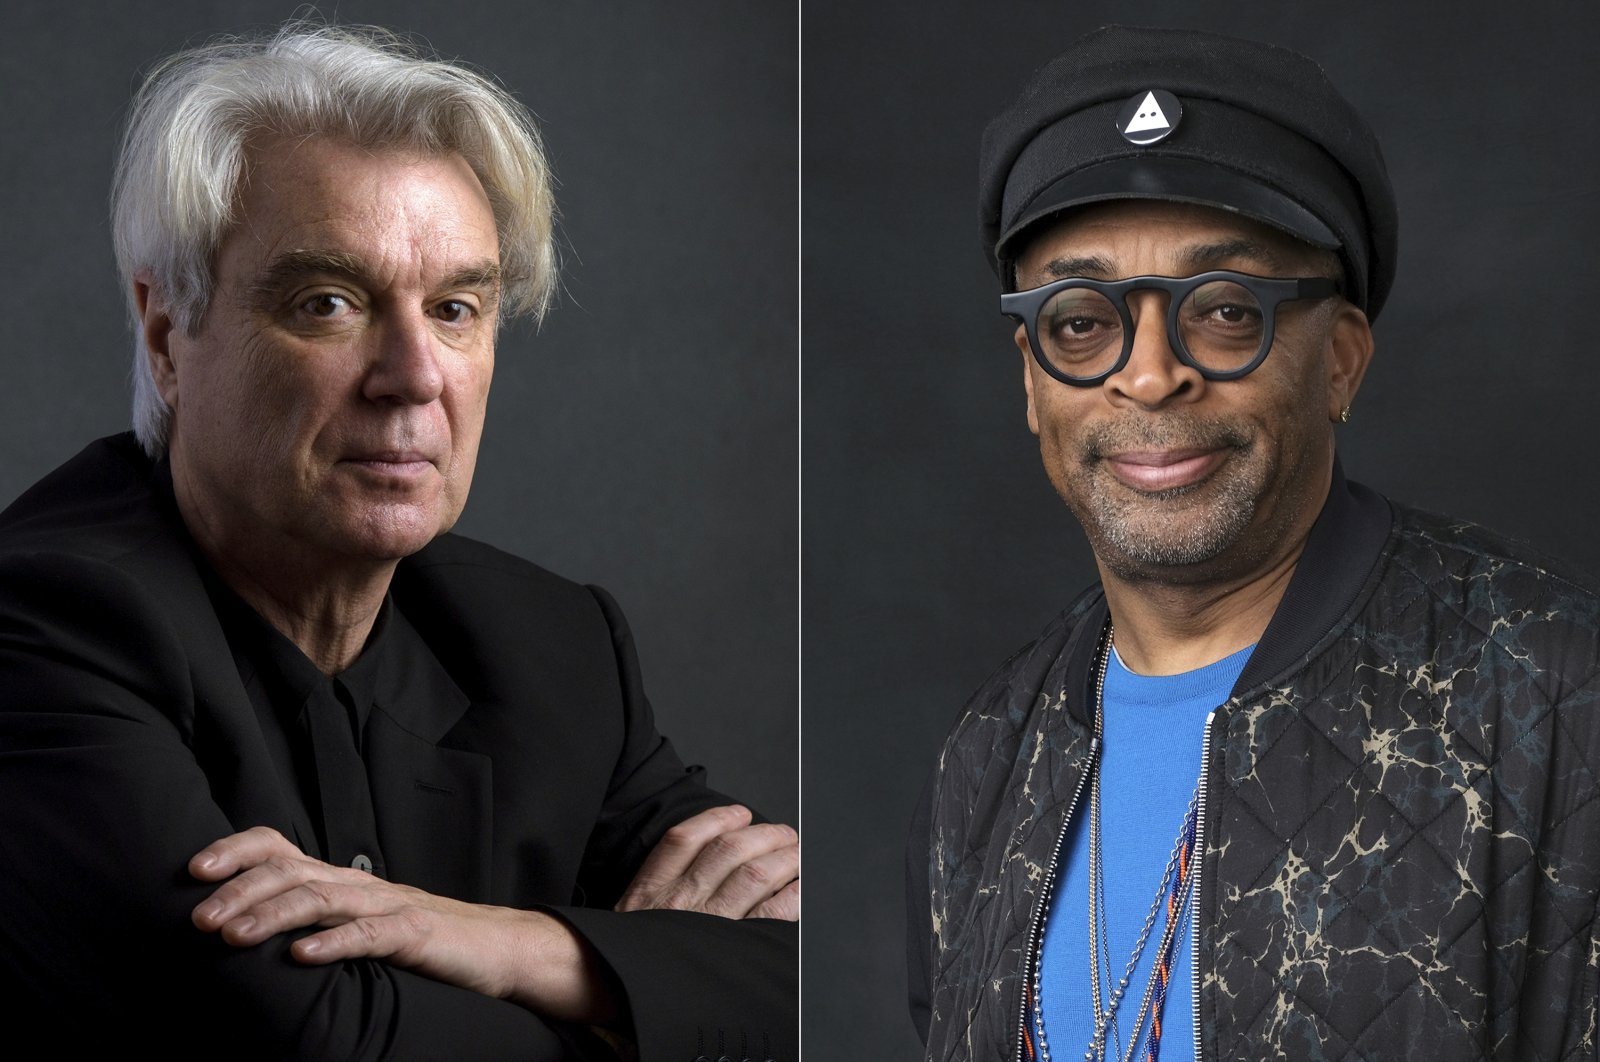 This combination photo shows musician David Byrne, left, and director Spike Lee. (AP Photo)